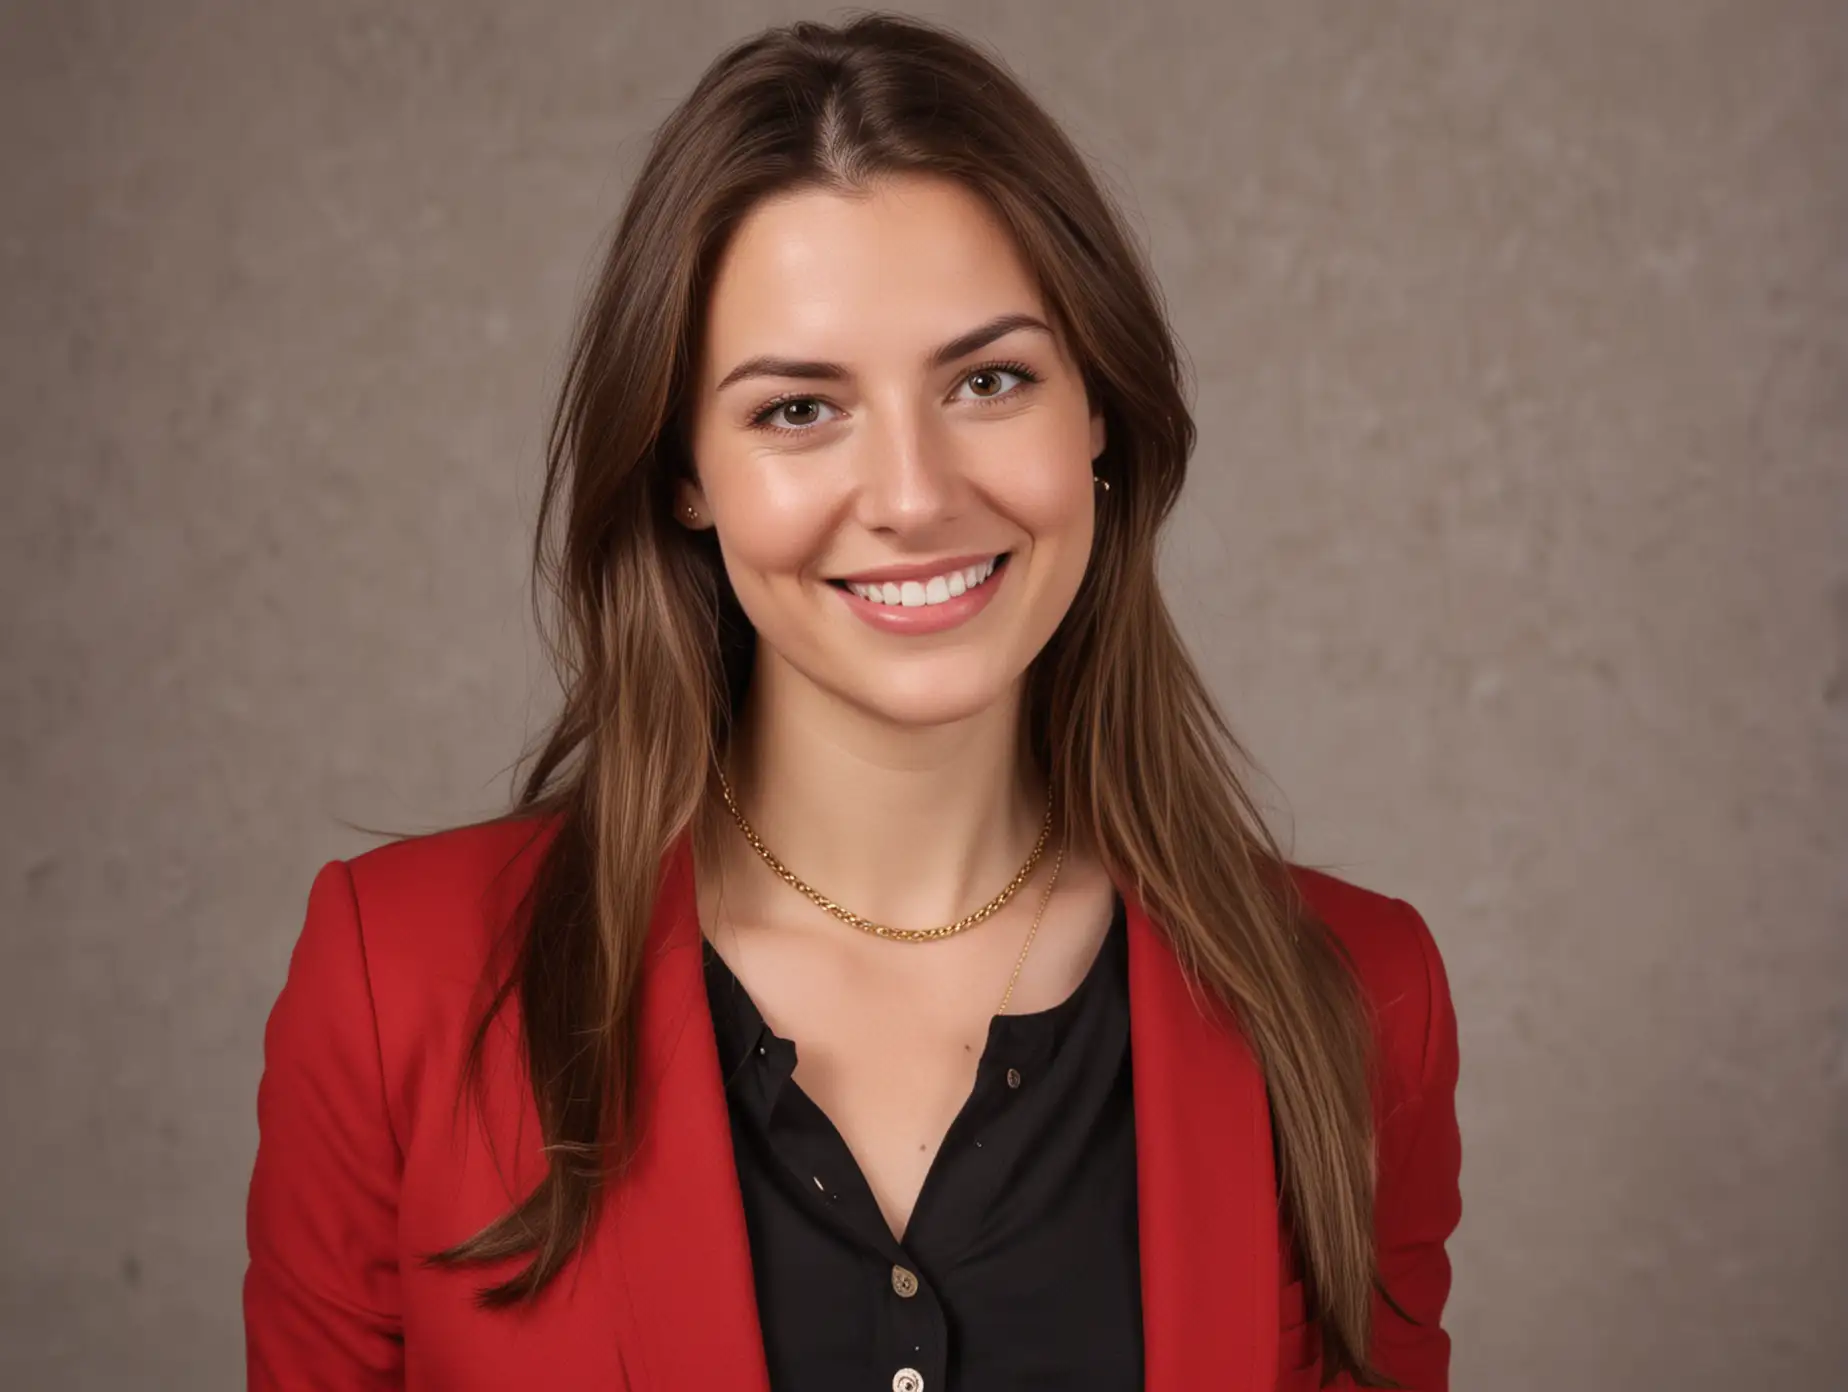 30 year old white woman with long  brown hair, wearing a buttoned up red blazer, simple gold necklace, plain black shirt and black dress pants. She is smiling at camera with eyebrows raised. She might be of Danish or German descent.